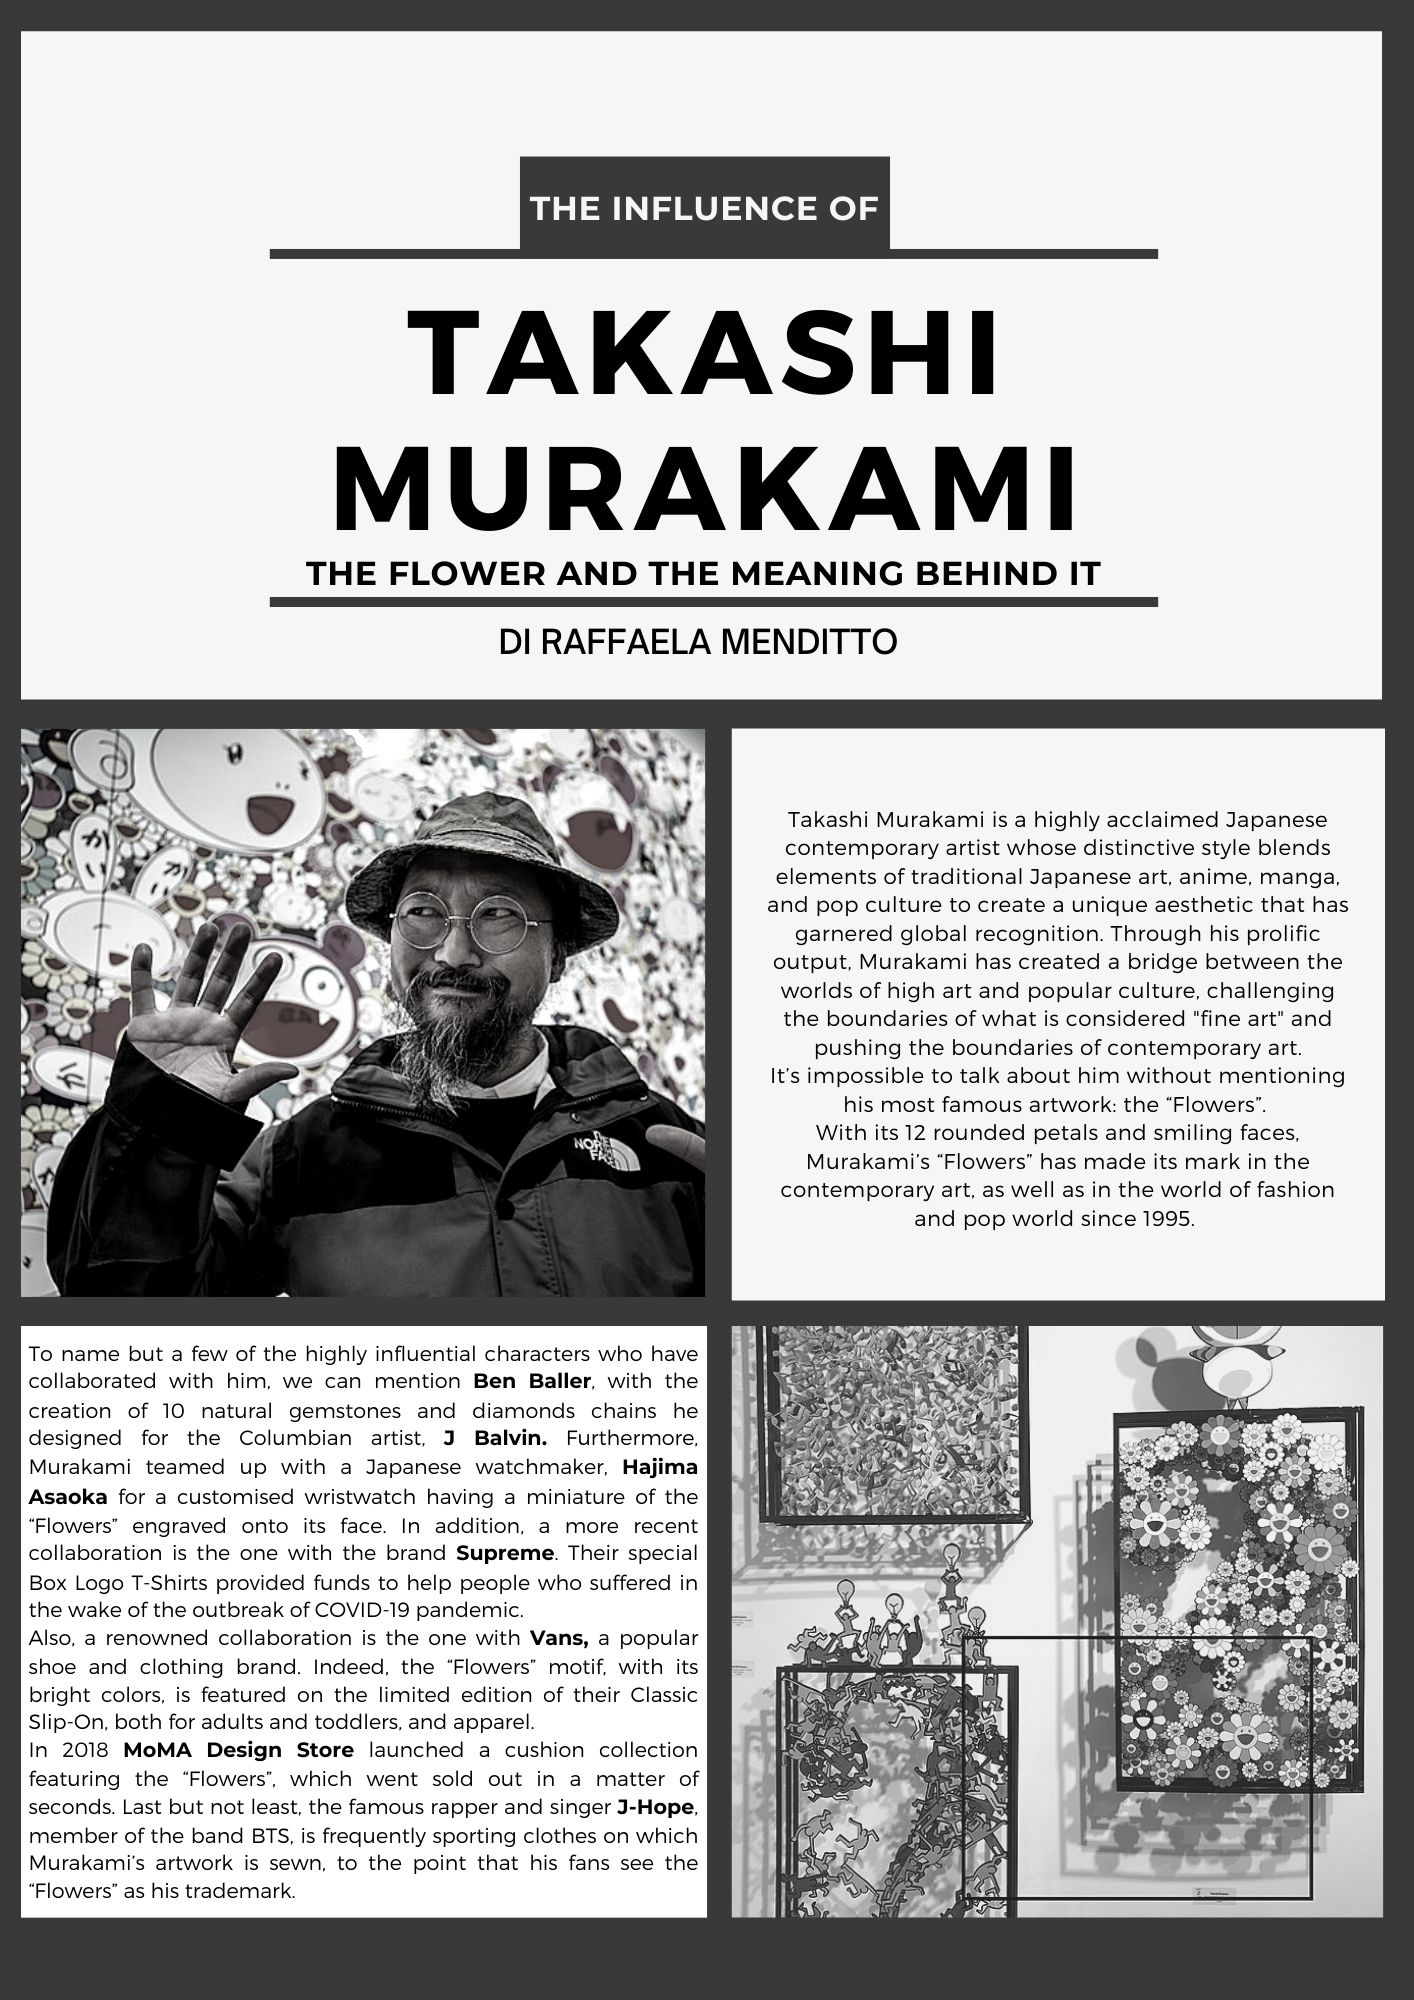 THE INFLUENCE OF TAKASHI MURAKAMI DI RAFFAELA MENDITTO Takashi Murakami is a highly acclaimed Japanese contemporary artist whose distinctive style blends elements of traditional Japanese art, anime, manga, and pop culture to create a unique aesthetic that has garnered global recognition. Through his prolific output, Murakami has created a bridge between the worlds of high art and popular culture, challenging the boundaries of what is considered fine art and pushing the boundaries of contemporary art. It’s impossible to talk about him without mentioning his most famous artwork: the Flowers.  With its 12 rounded petals and smiling faces, Murakami’s Flowers has made its mark in the contemporary art, as well as in the world of fashion and pop world since 1995.  To name but a few of the highly influential characters who have collaborated with him, we can mention Ben Baller, with the creation of 10 natural gemstones and diamonds chains he designed for the Columbian artist, J Balvin. Furthermore, Murakami teamed up with a Japanese watchmaker, Hajima Asaoka for a customised wristwatch having a miniature of the Flowers engraved onto its face. In addition, a more recent collaboration is the one with the brand Supreme. Their special Box Logo T-Shirts provided funds to help people who suffered in the wake of the outbreak of COVID-19 pandemic. Also, a renowned collaboration is the one with Vans, a popular shoe and clothing brand. Indeed, the “Flowers” motif, with its bright colors, is featured on the limited edition of their Classic Slip-On, both for adults and toddlers, and apparel.  In 2018 MoMA Design Store launched a cushion collection featuring the Flowers, which went sold out in a matter of seconds. Last but not least, the famous rapper and singer J-Hope, member of the band BTS, is frequently sporting clothes on which Murakami’s artwork is sewn, to the point that his fans see the Flowers as his trademark.